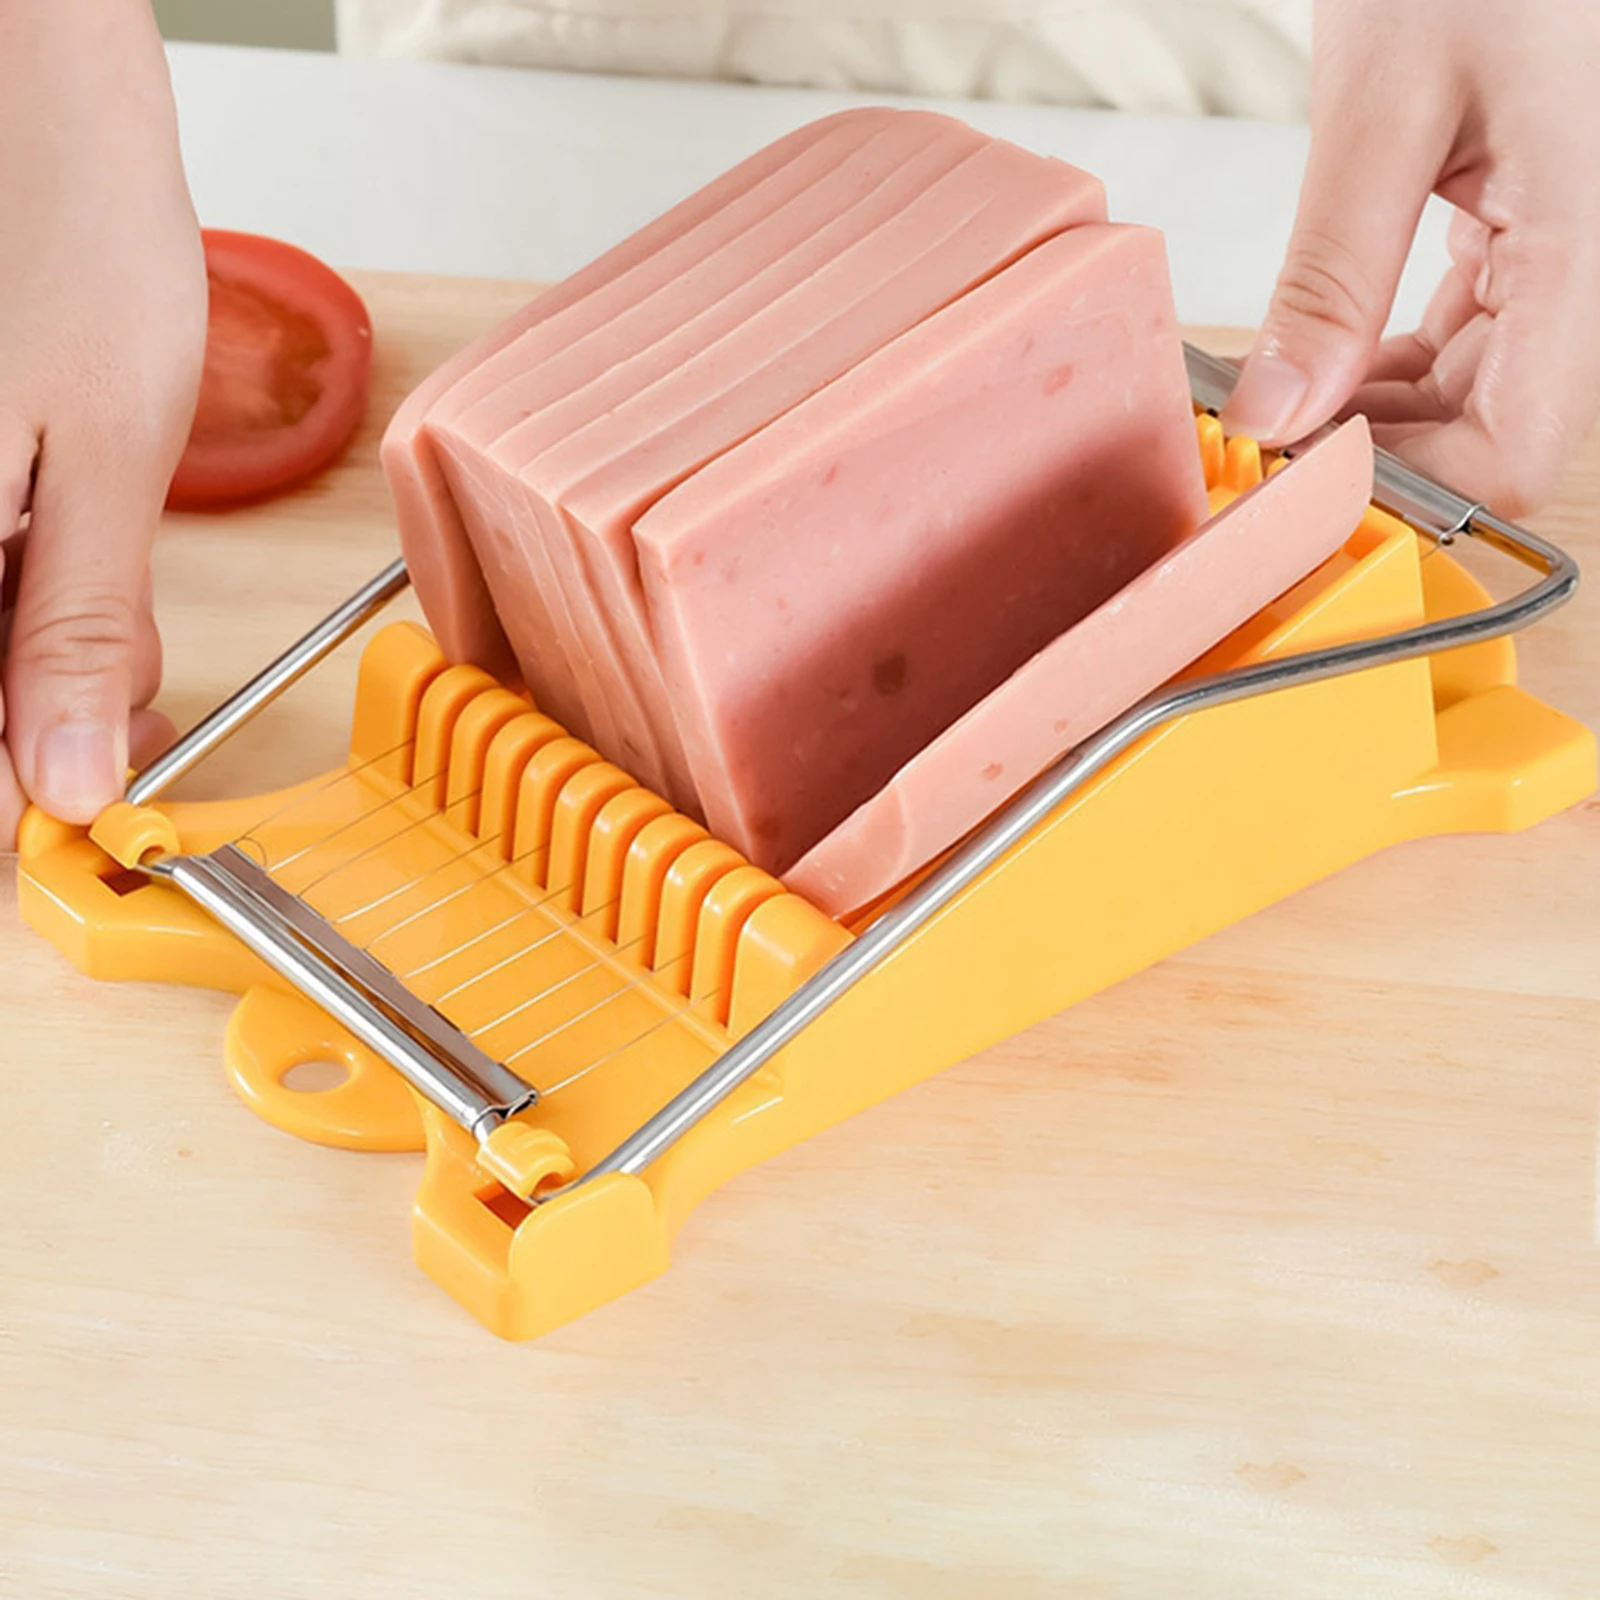 Luncheon Meat Slicer 304 Reinforced Stainless Steel Boiled Egg Fruit Soft Cheese Slicer Spam Cutter